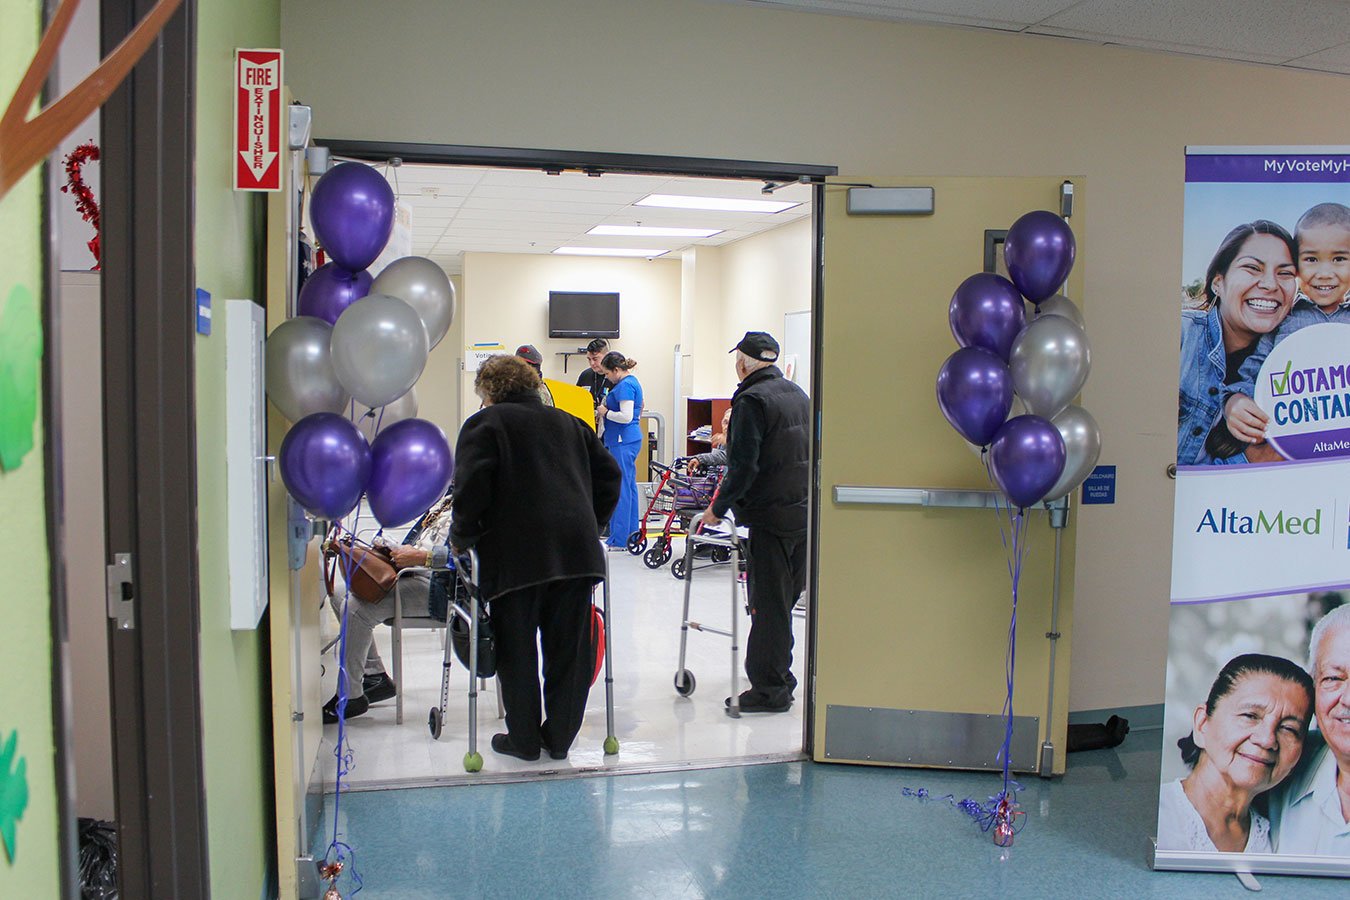 The voting room at the AltaMed PACE center in L.A.’s Chinatown was flanked by purple and silver balloons on February 24.